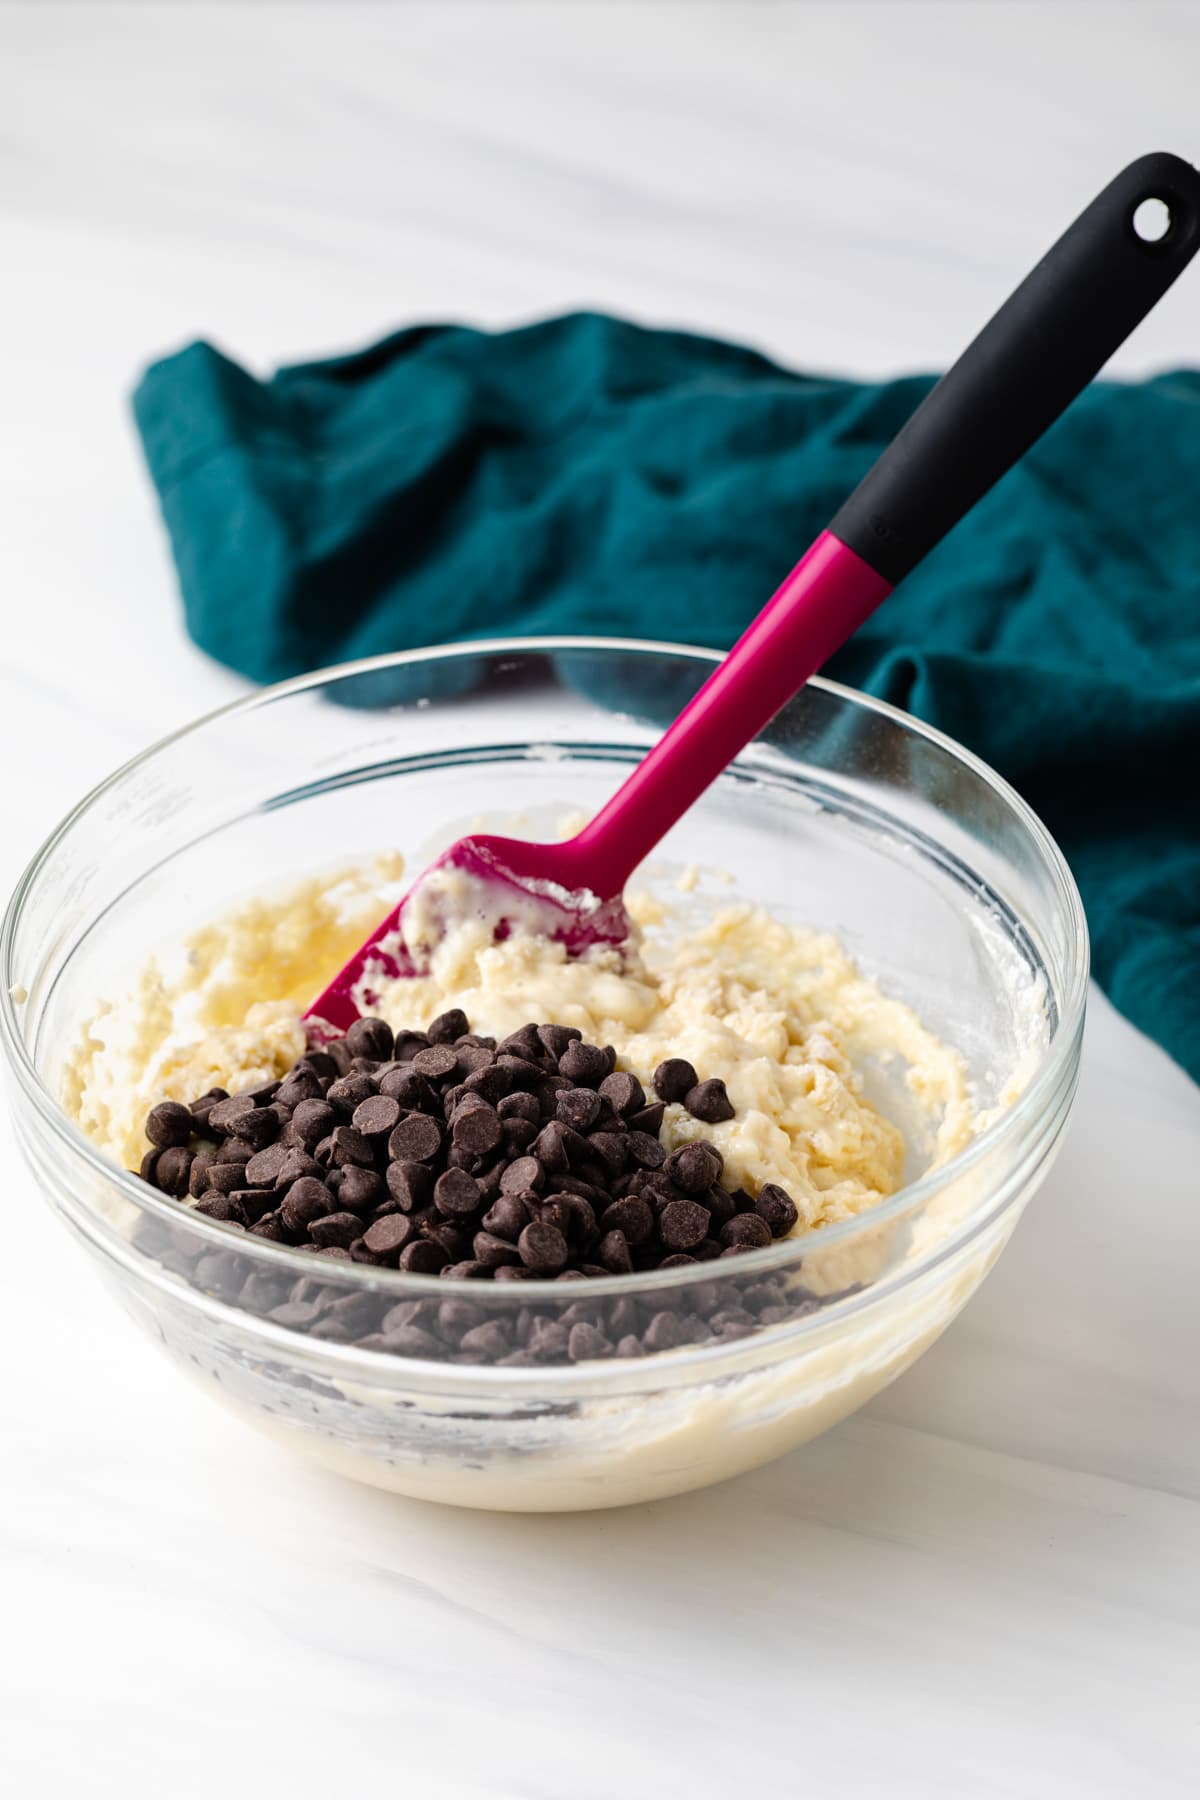 chocolate chips added to muffin batter in glass bowl with pink spatula